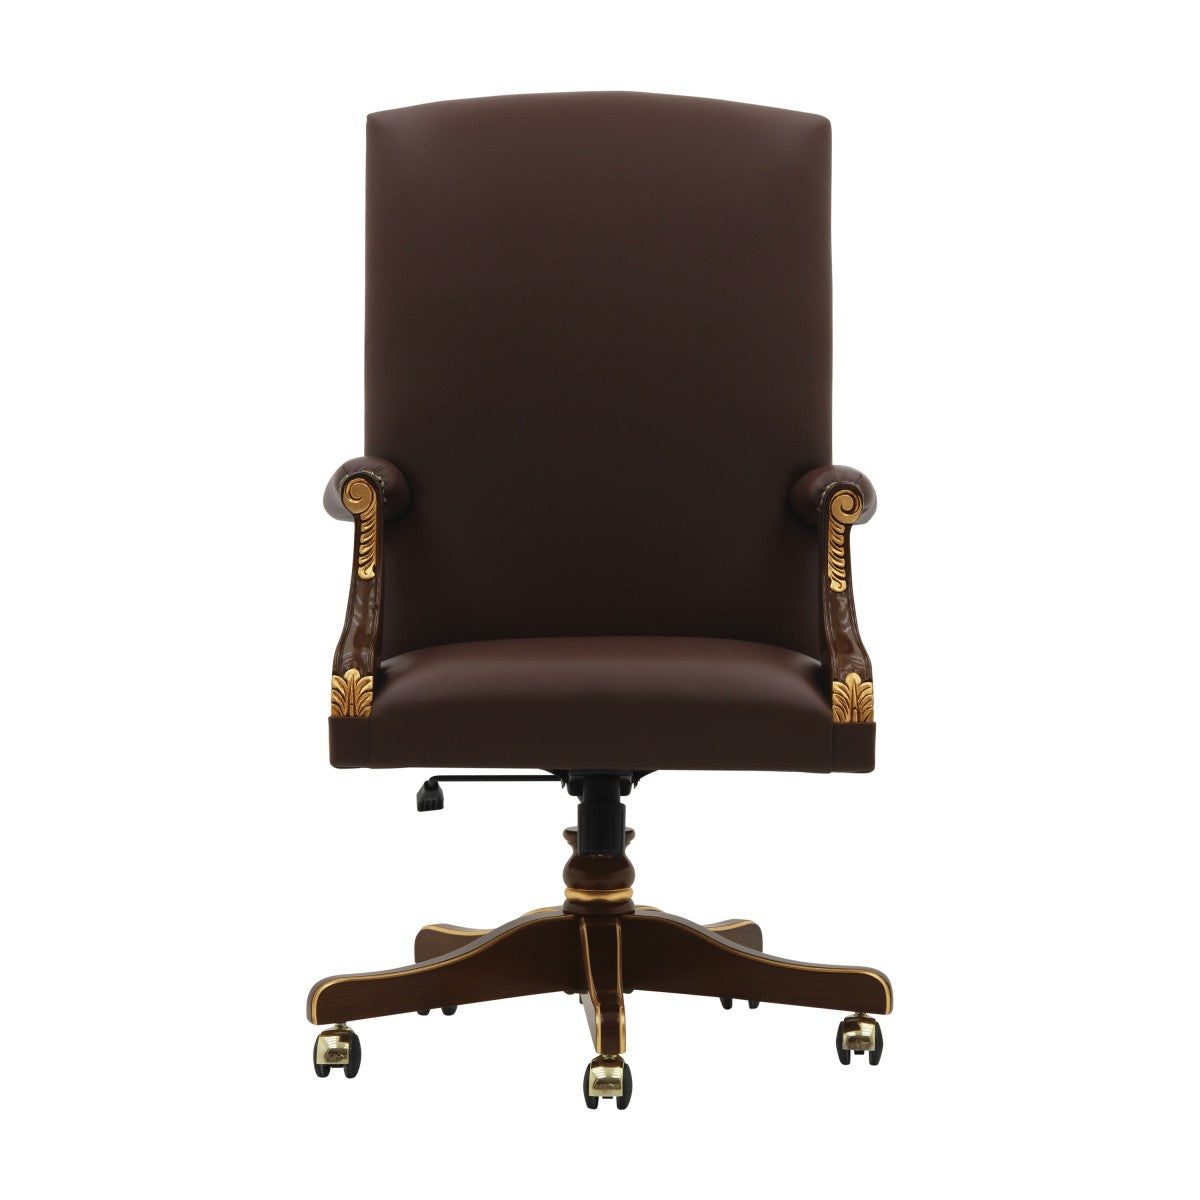 Franklin Bespoke Upholstered Luxury Executive Swivel Office Desk Chair MS357P Custom Made To Order